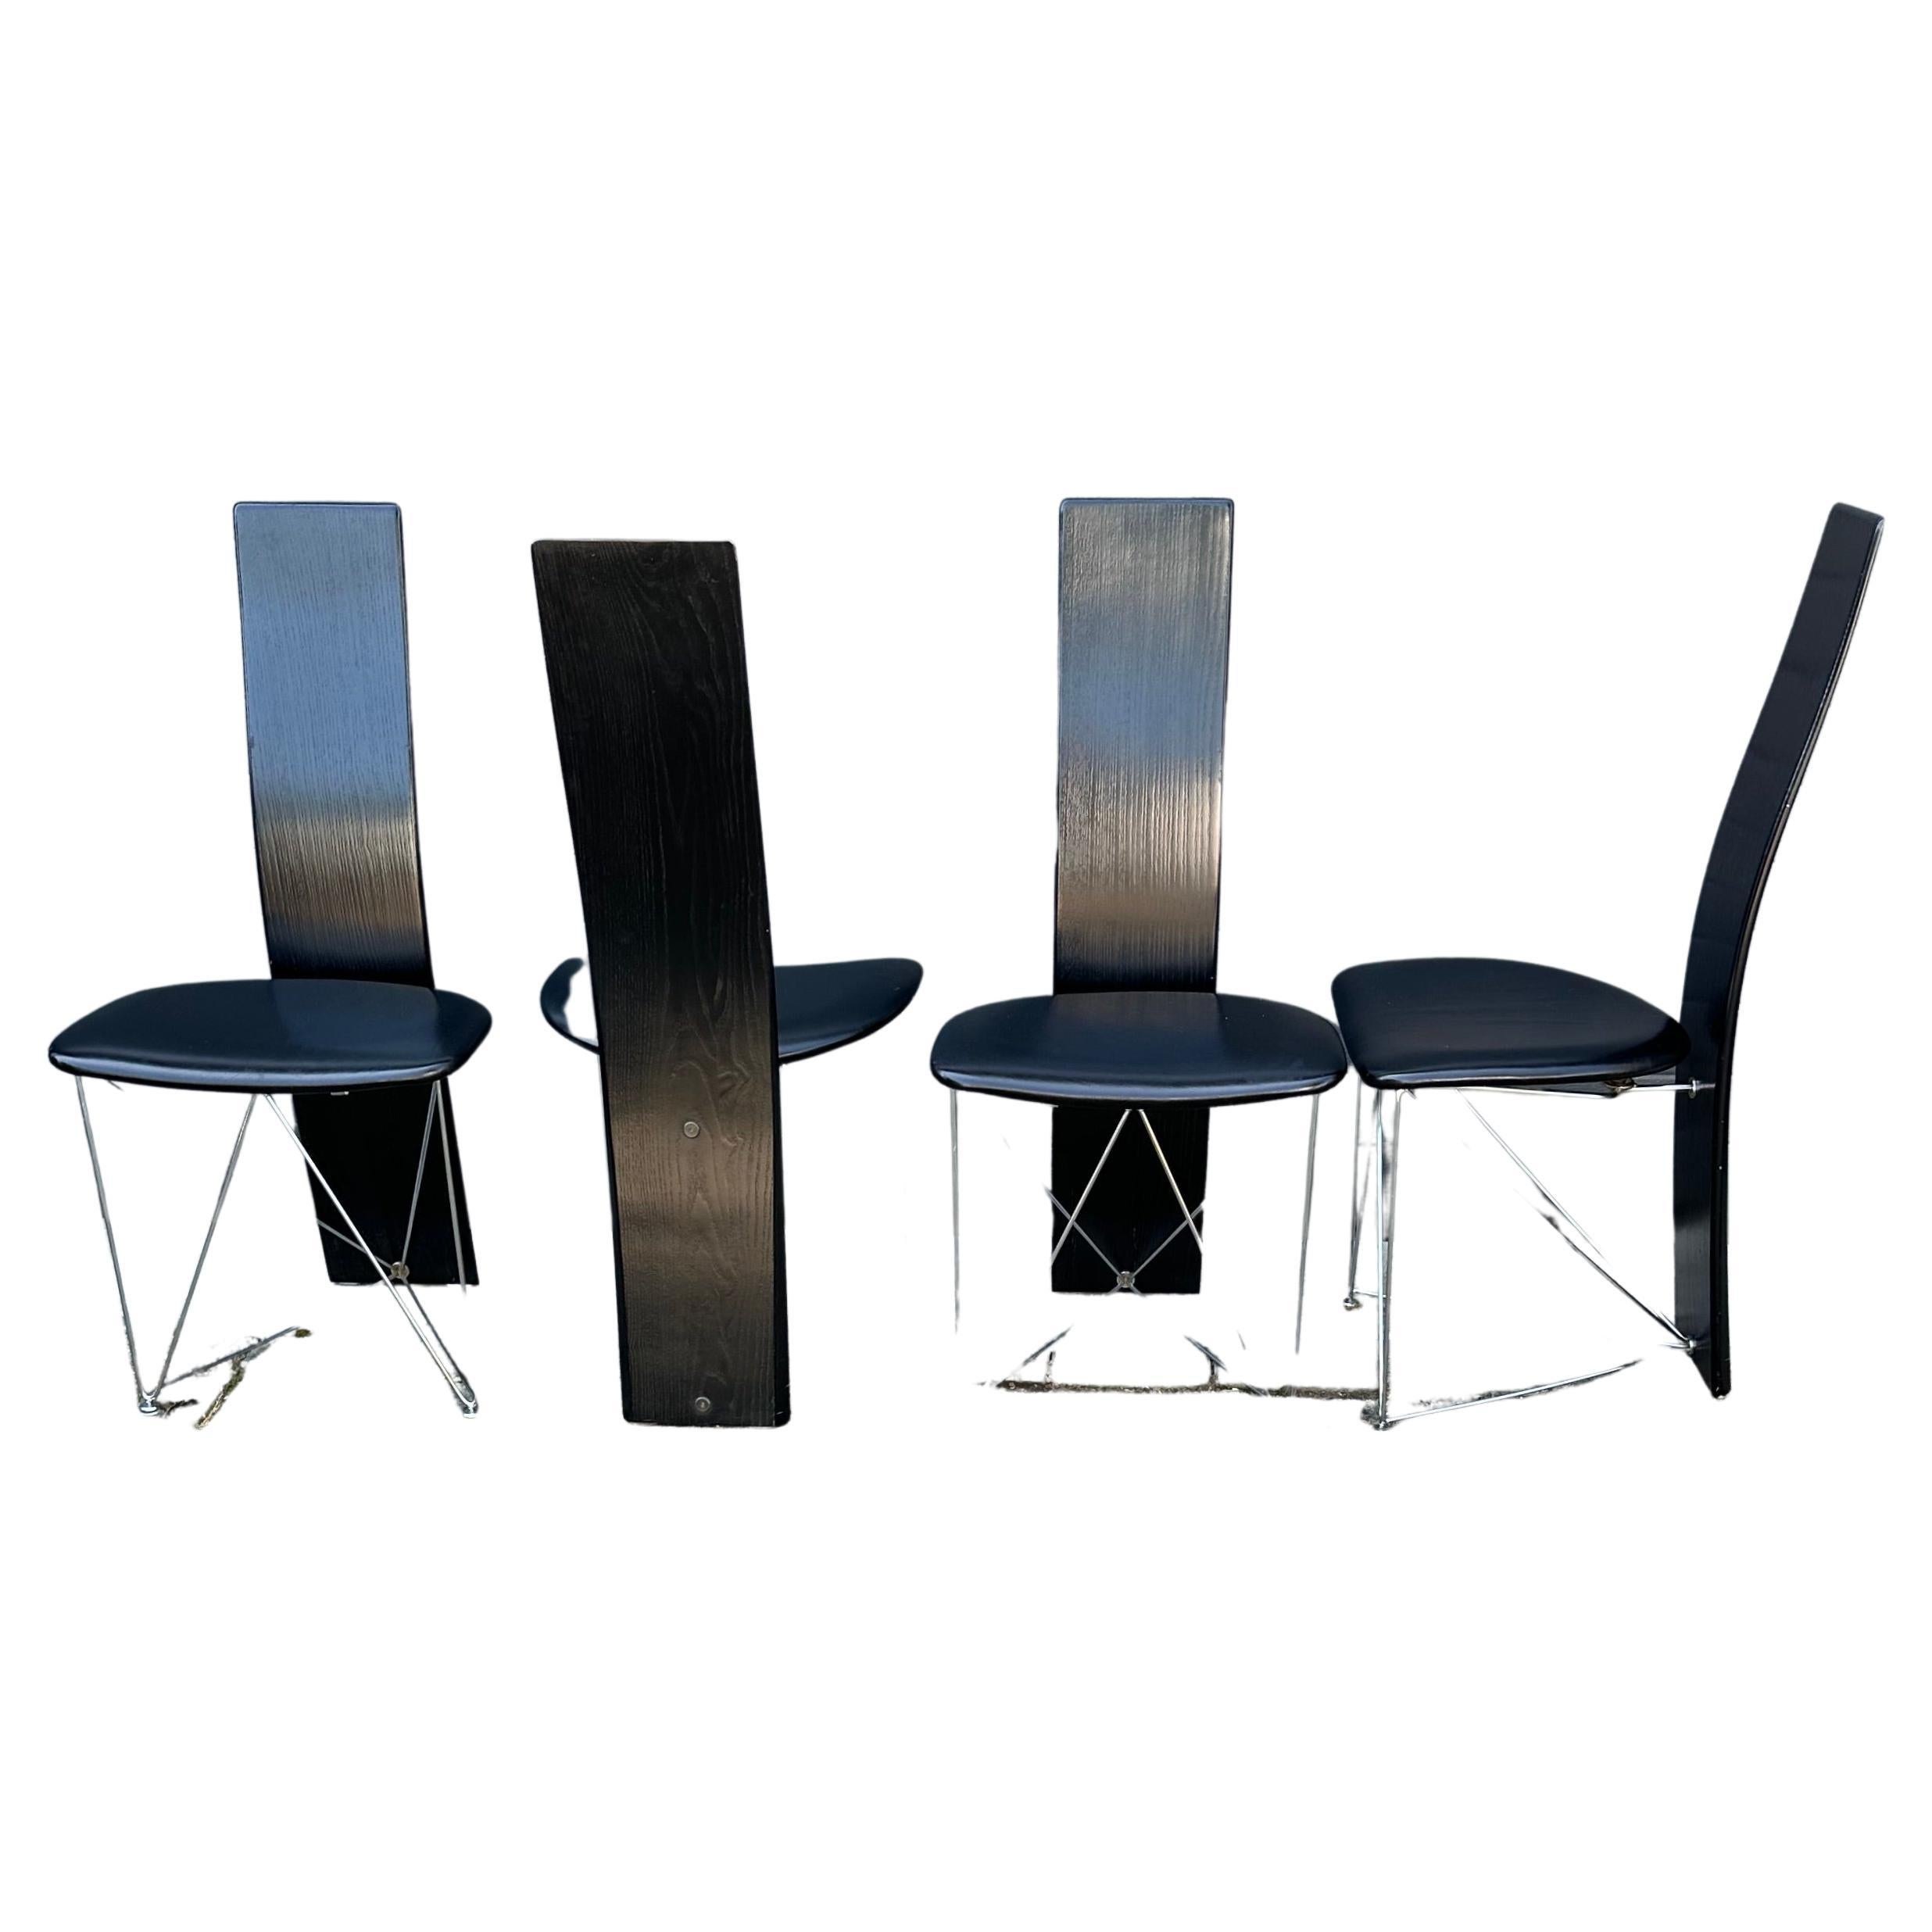 The Moderns Set of 4 Dining Chairs with Leather Seats by Torstein Flatøy for Bahus en vente